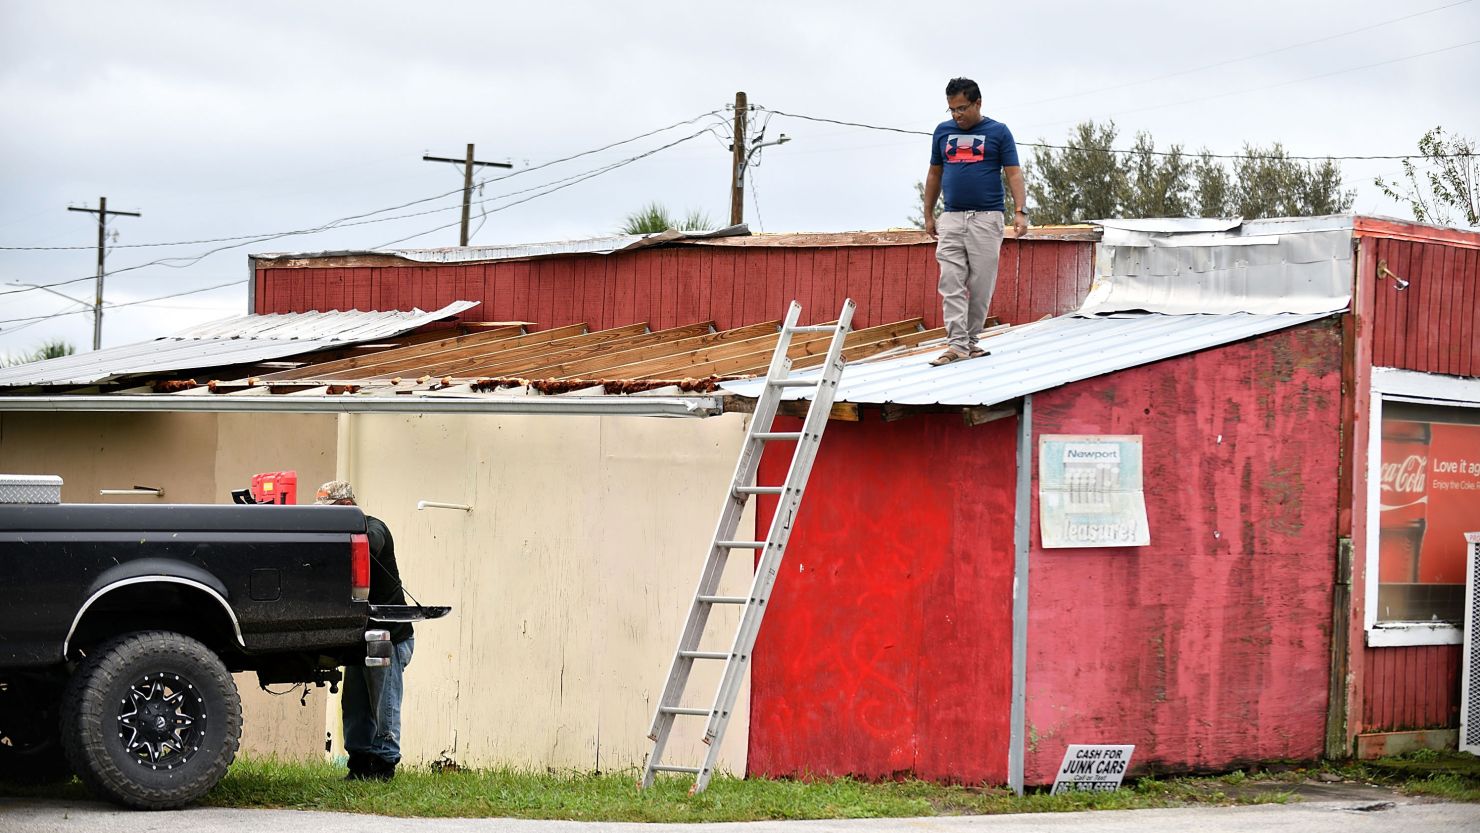 Talukder Mahtab surveys the roof of his business after it was hit by the winds and rain from Hurricane Ian on September 29, 2022 in Bartow, Florida.